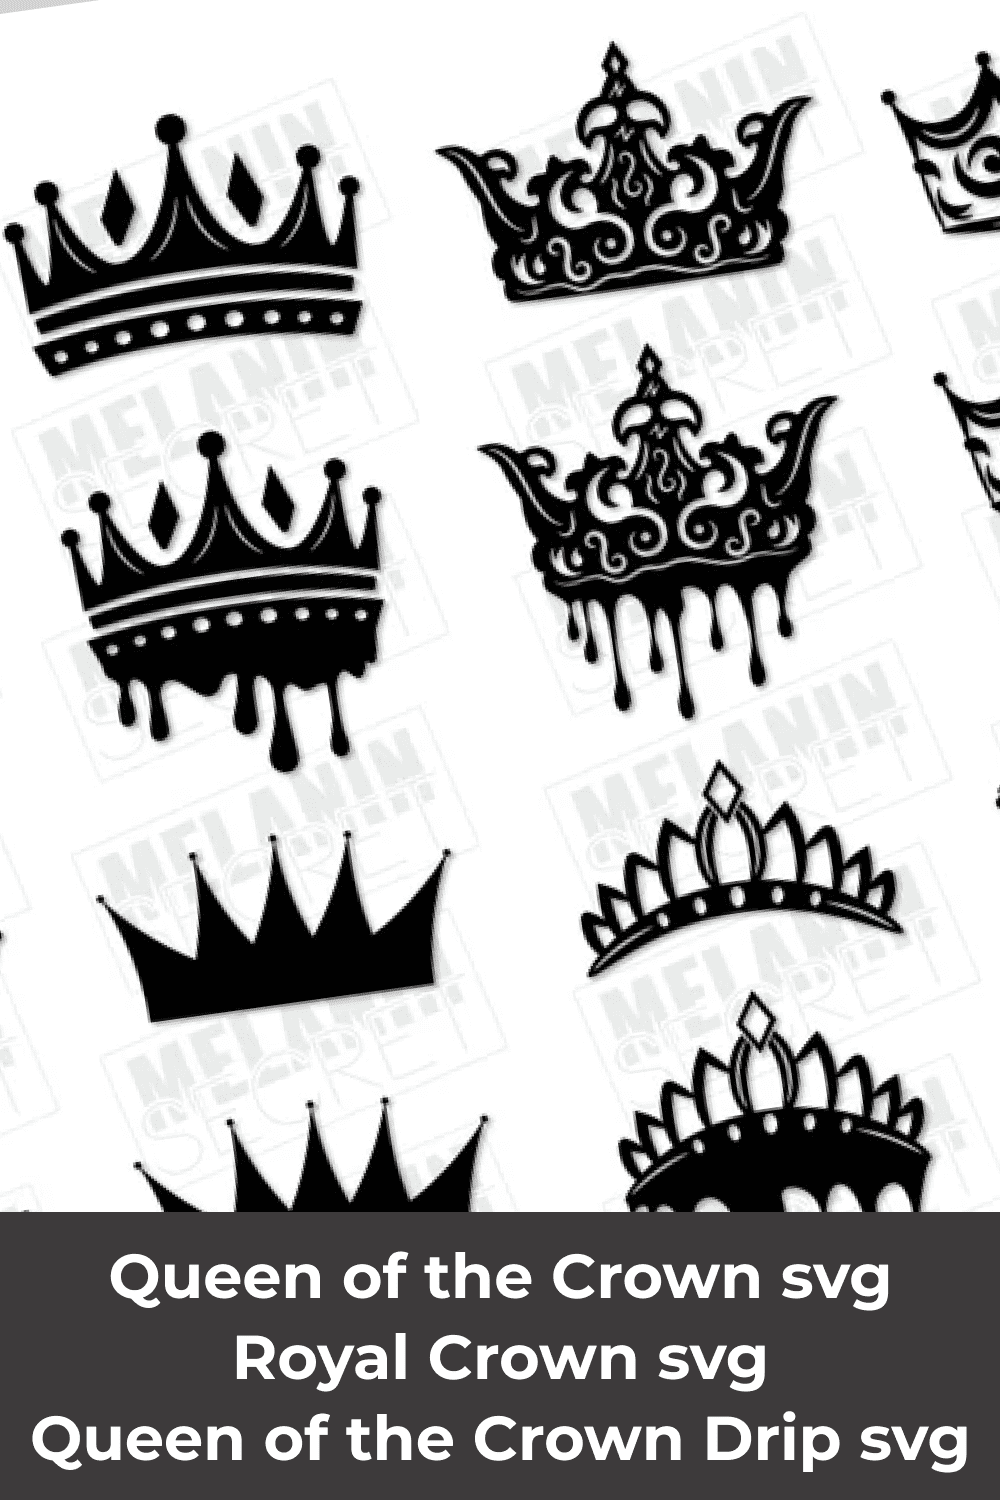 06 queen of the crown svg royal crown svg queen of the crown drip svg 1000x1500 1